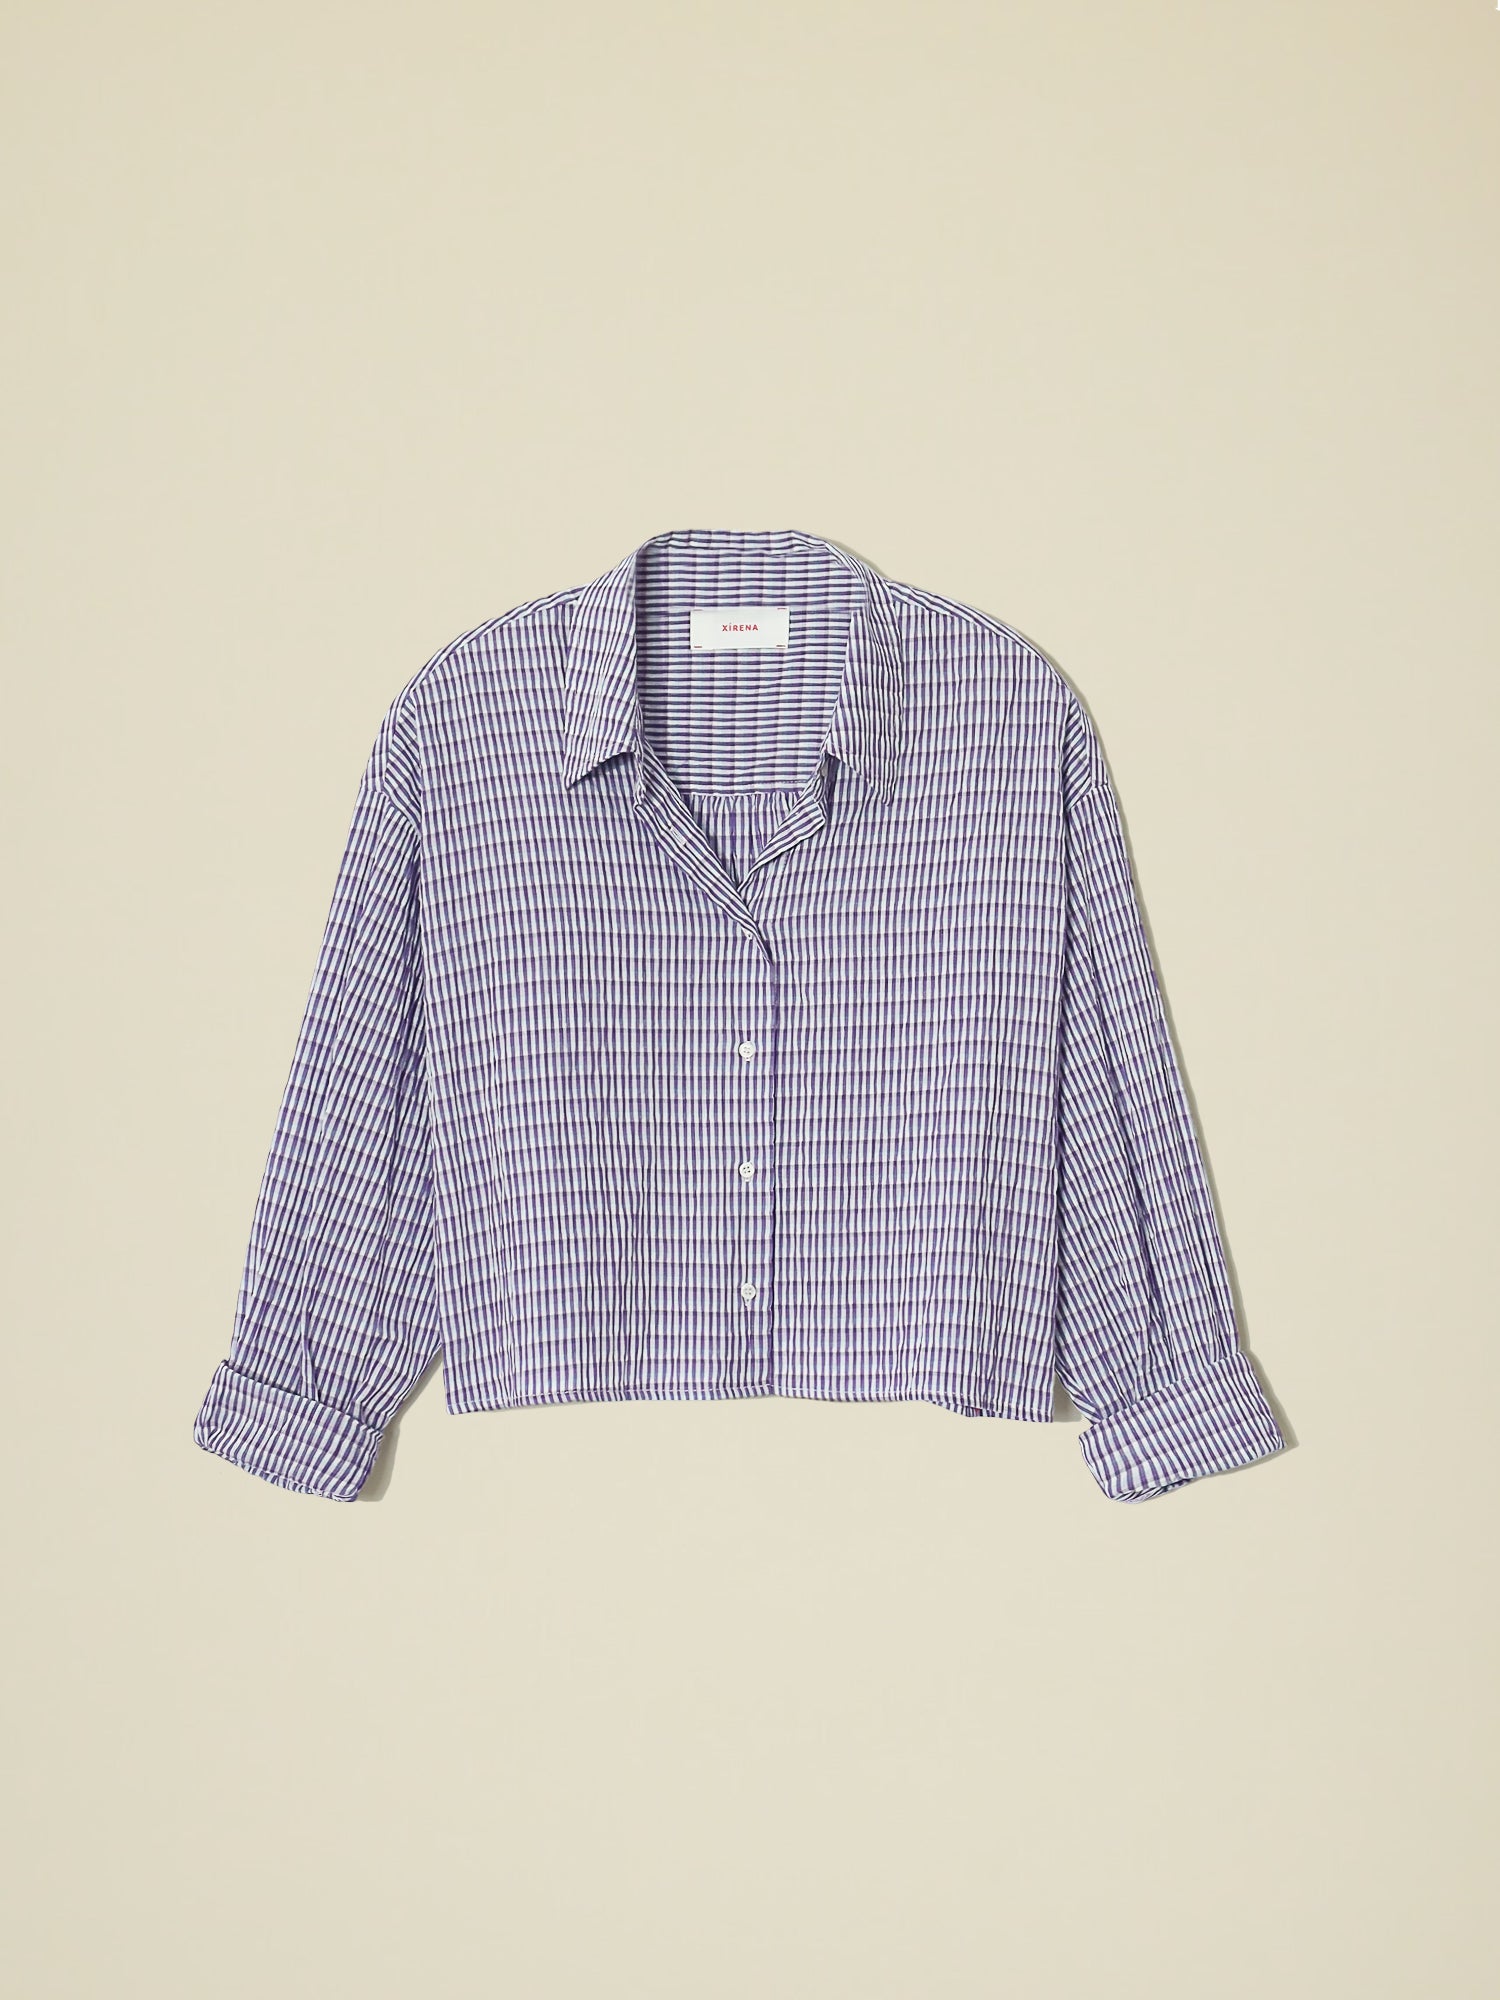 The Dawson Shirt from Xirena is designed with a unique crinkled cotton blend for added comfort and style.